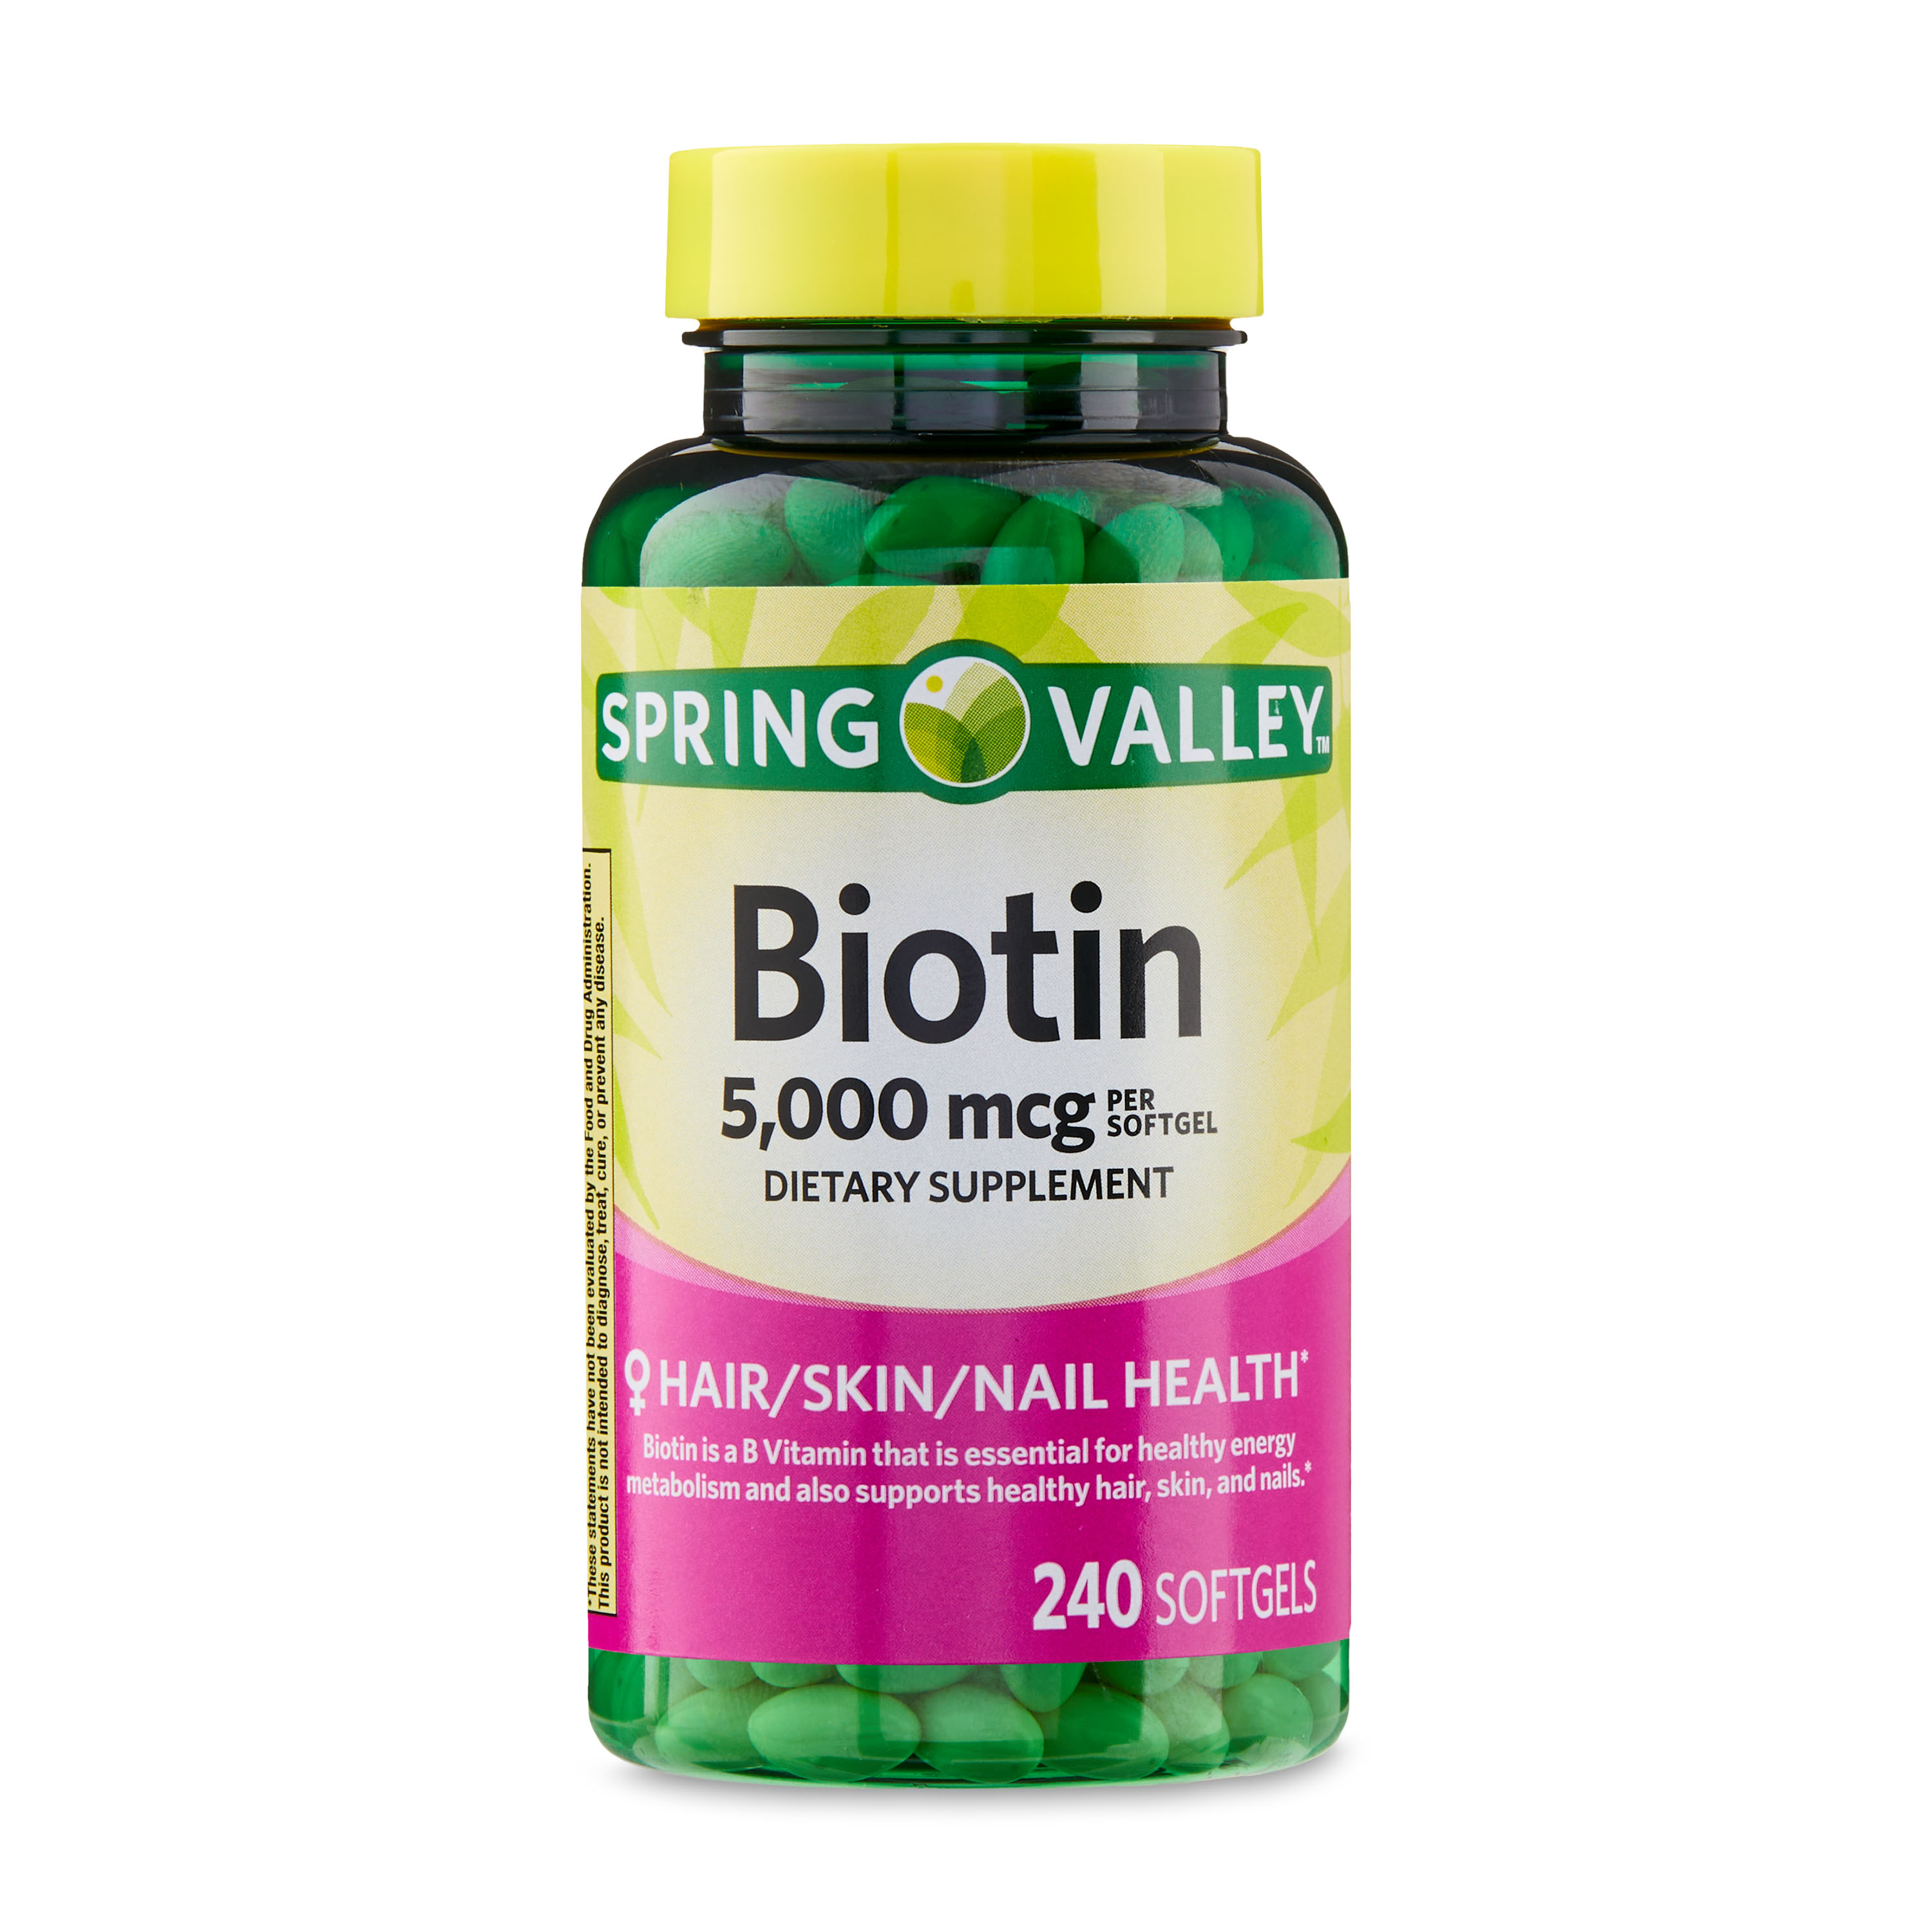 Spring Valley Biotin Softgels Dietary Supplement, 5,000 mcg, 240 Count - image 1 of 16